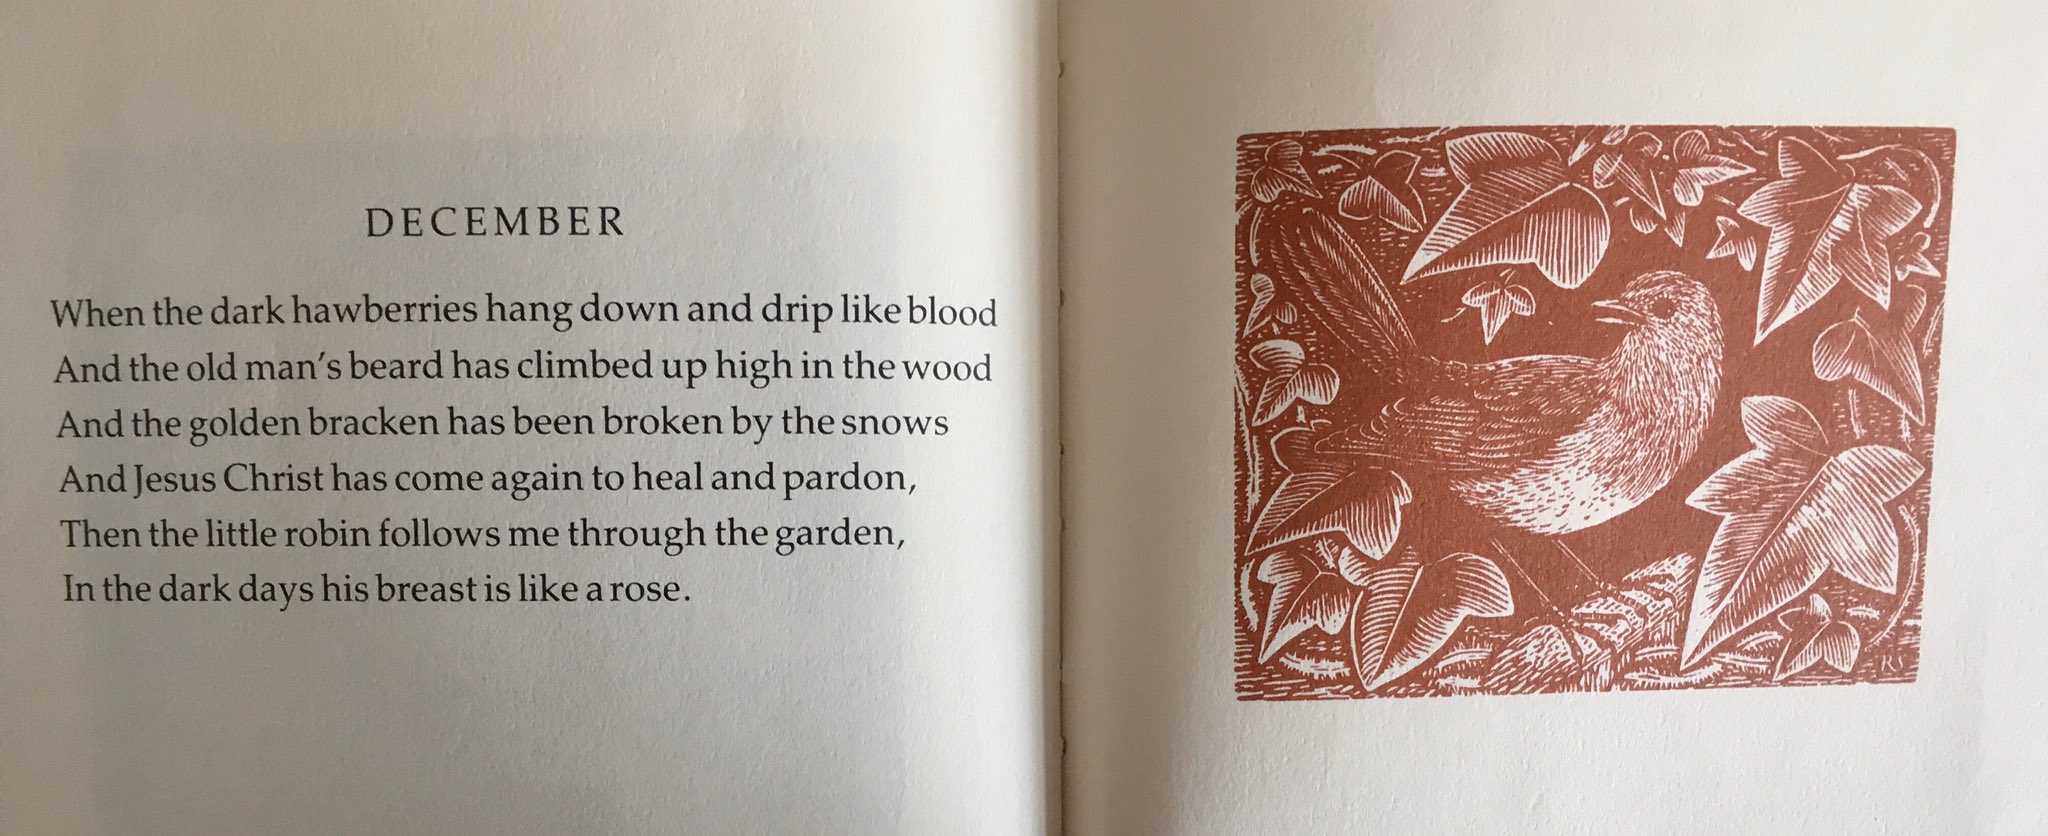 Iris Murdoch, 'December', with illustration by Reynold Stone, from ‘A Year of Birds’ (1933).